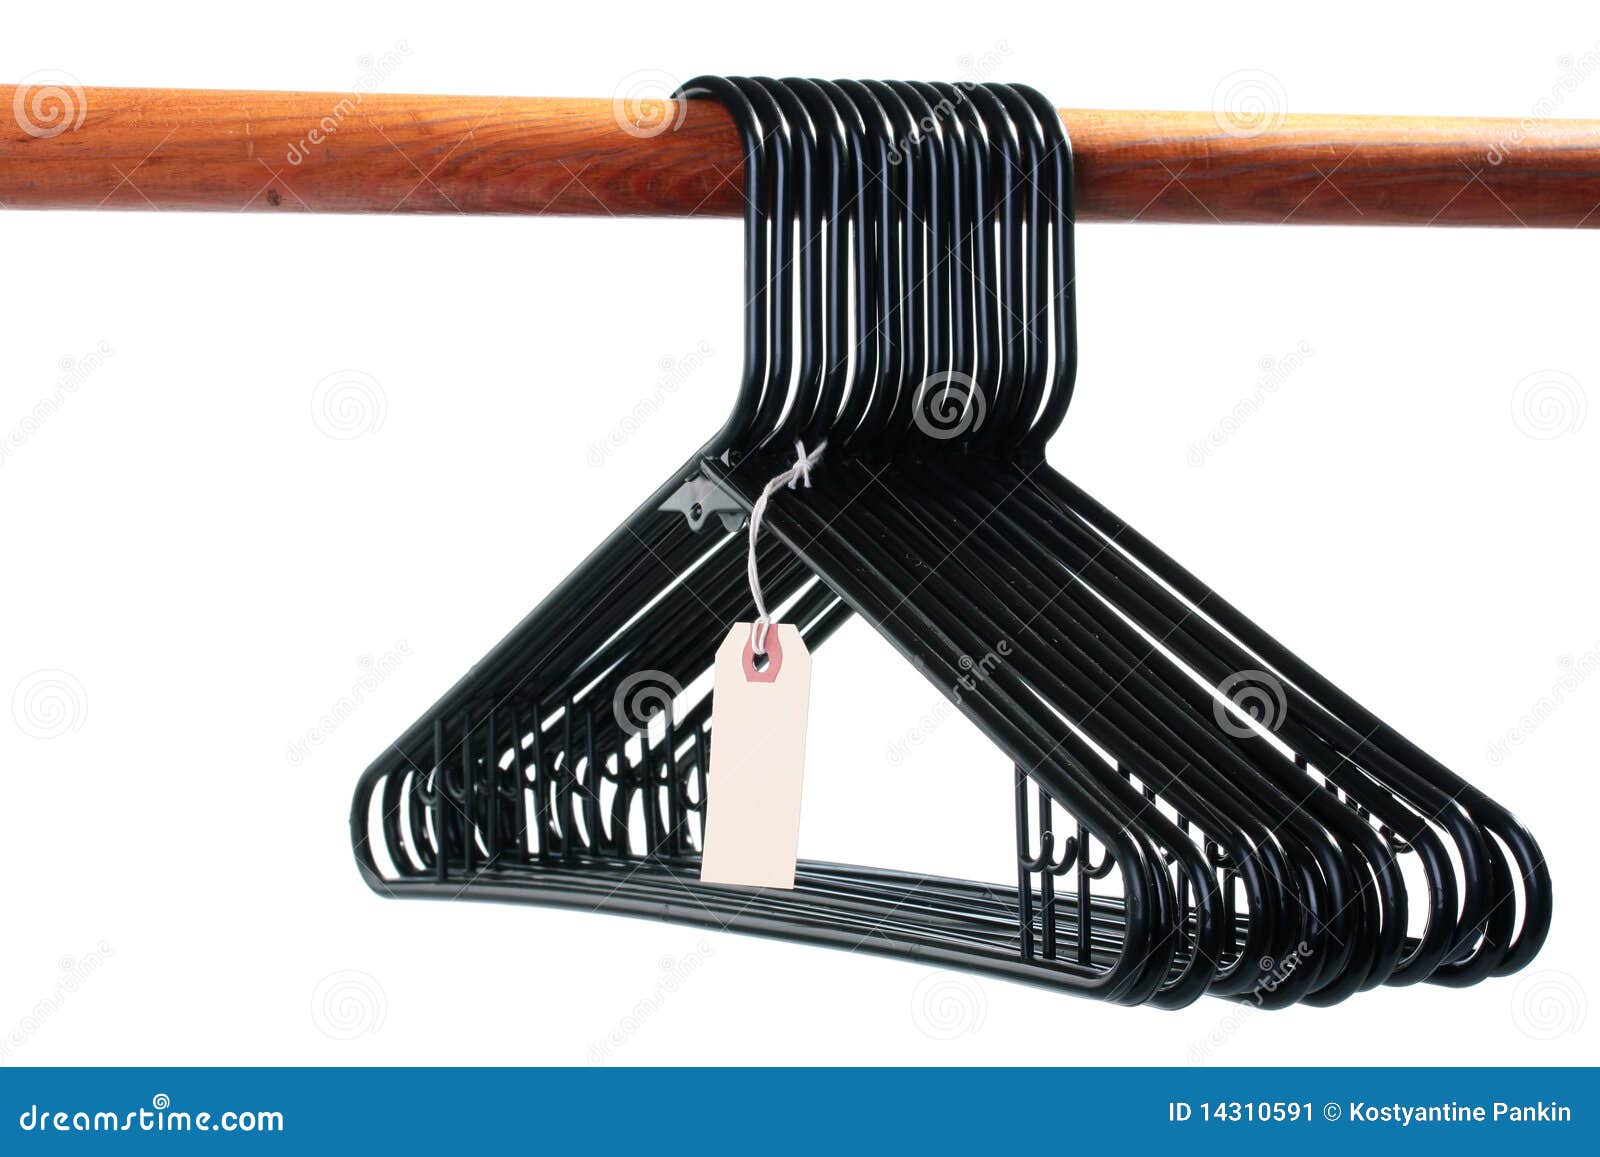 Black hangers for clothes on a wooden crossbeam with a label on a white background.